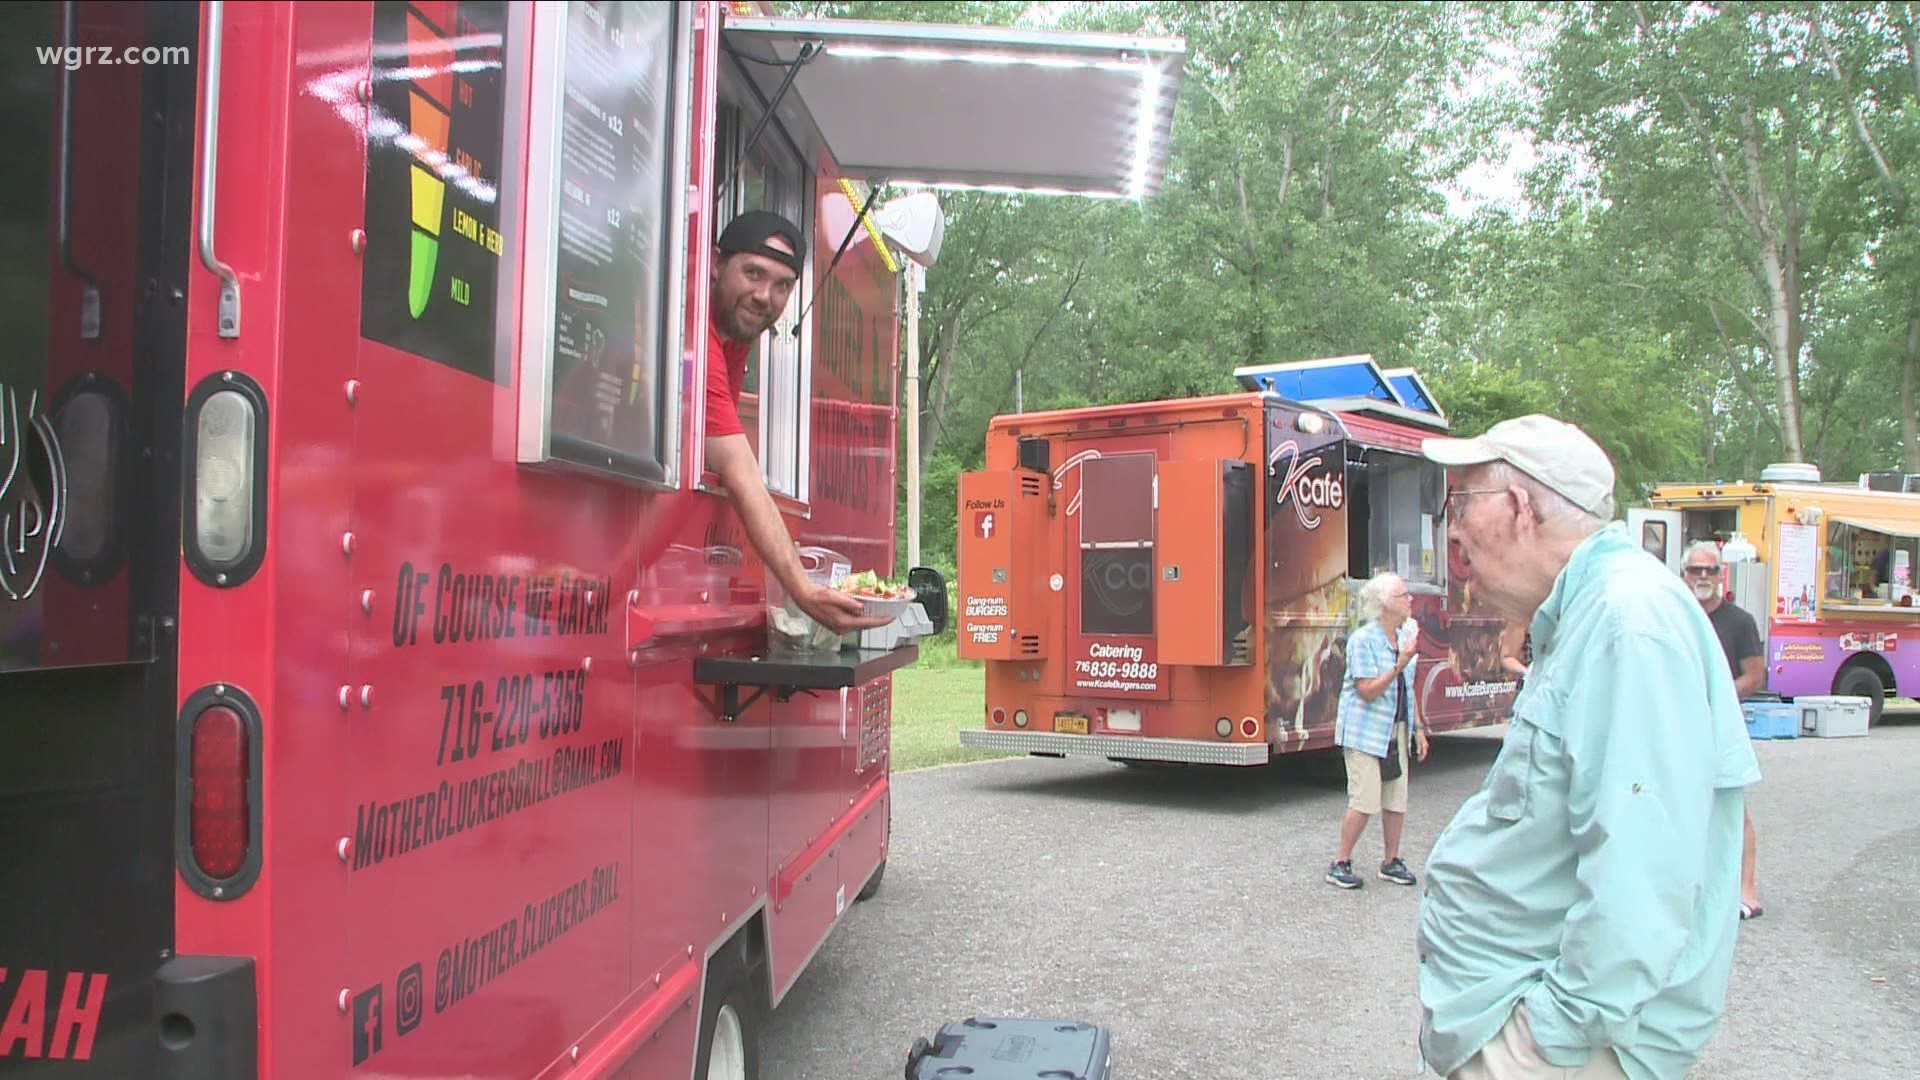 Food trucks and hungry patrons gathered Friday night at Veterans Canal Park for the food truck rodeo, from 4 to 7 p.m.